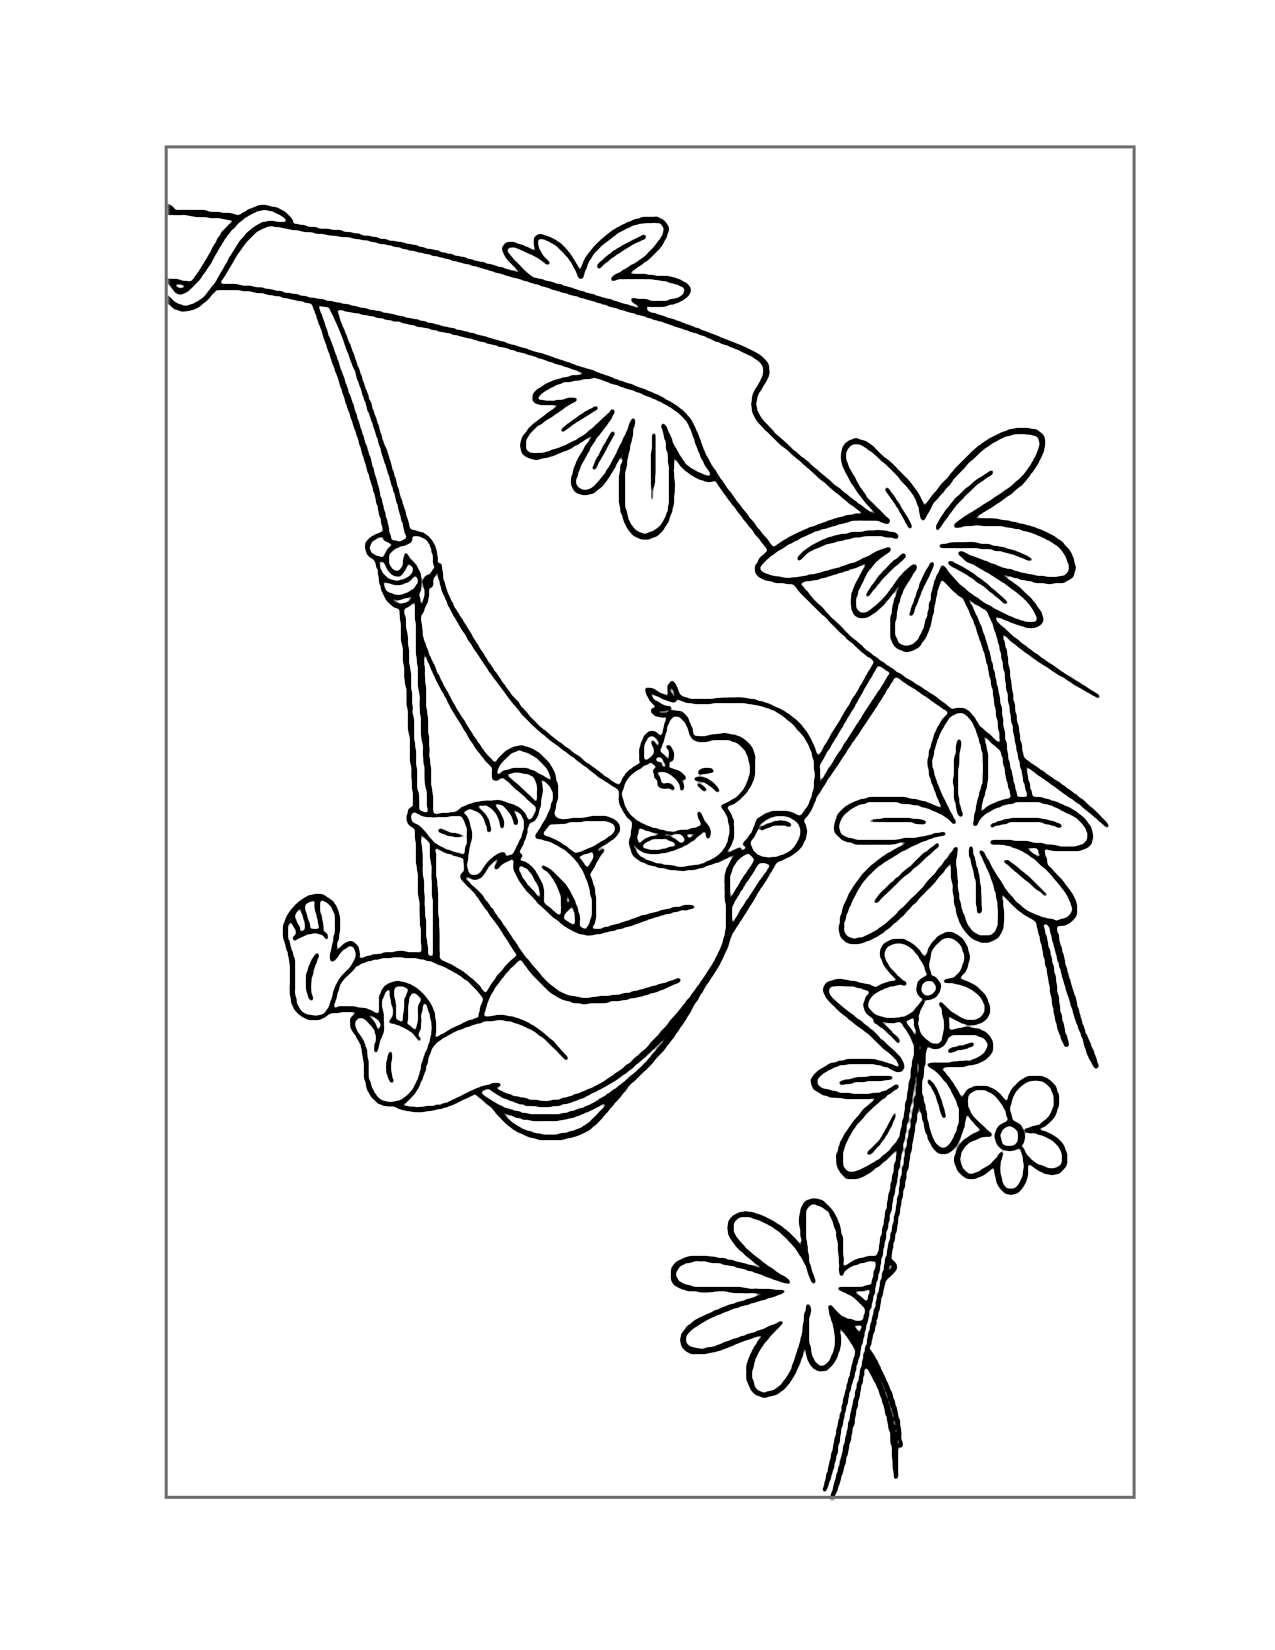 Curious George In A Tree Coloring Page